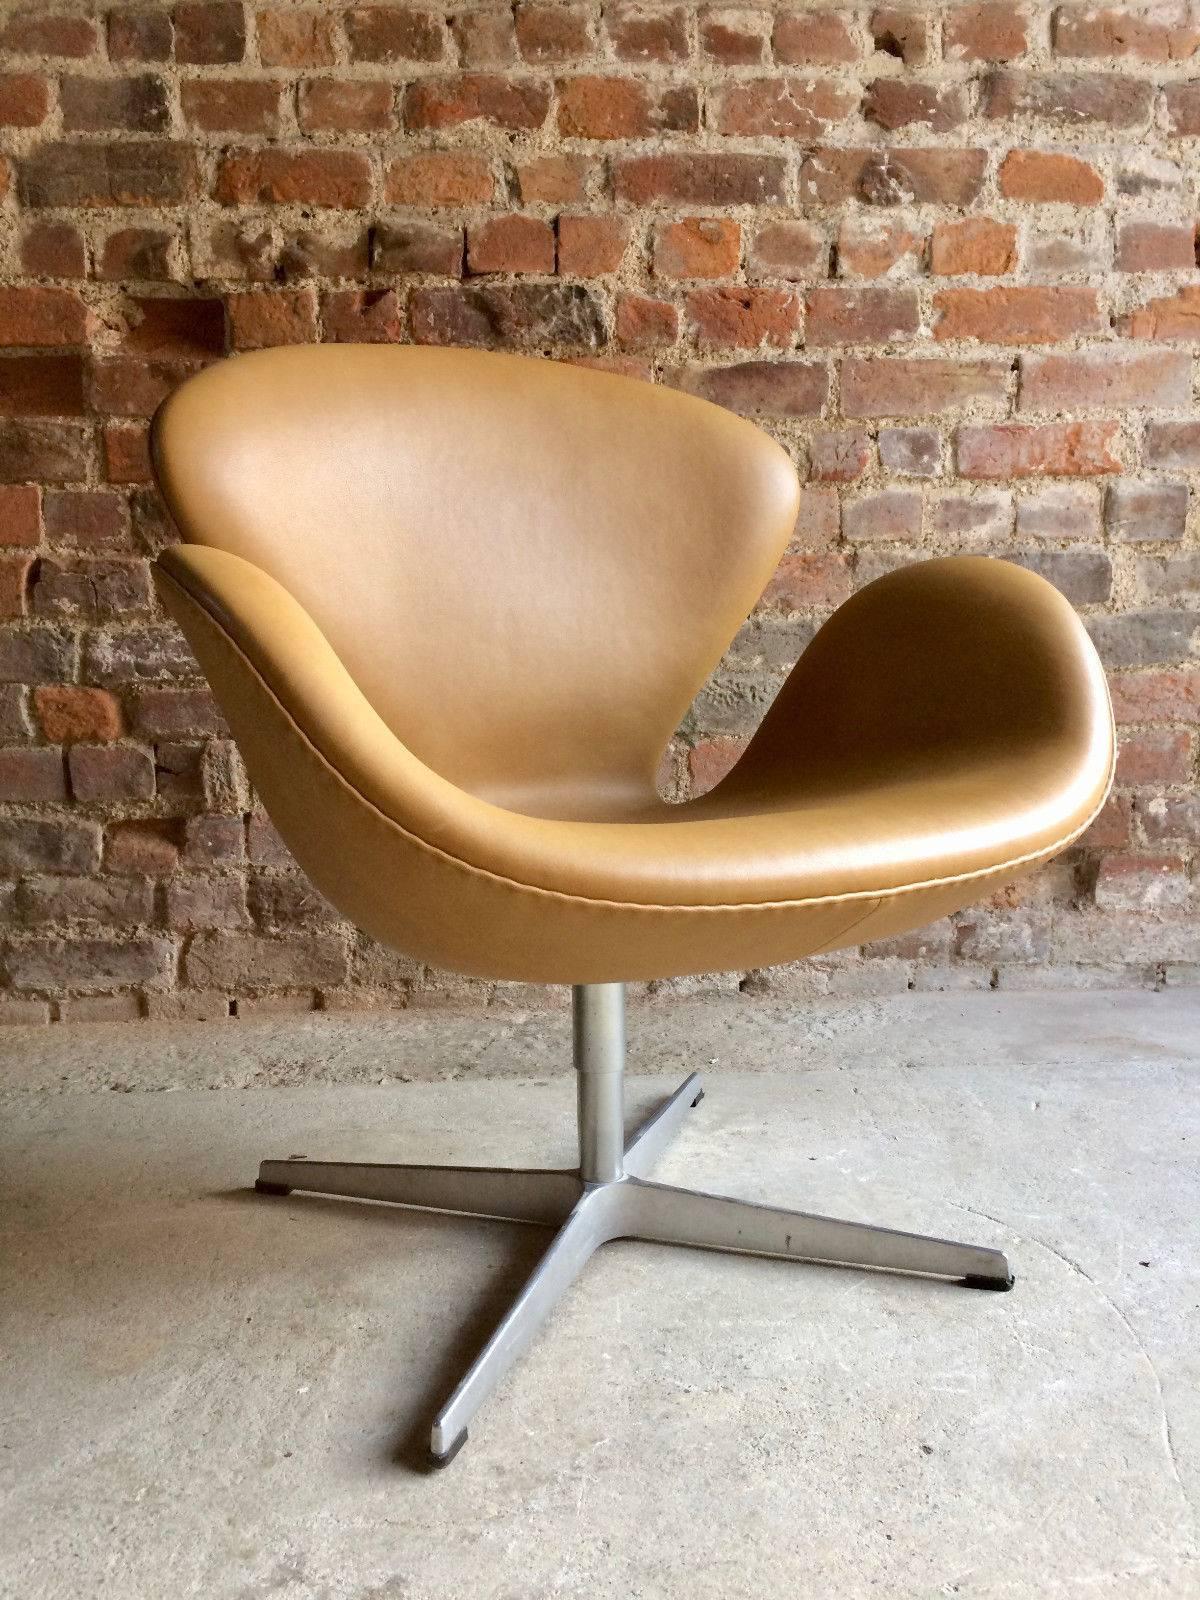 A Swan chair designed by Arne Jacobsen and manufactured by Fritz Hansen 2007, soft mustard  leather hide with steel base, makers label under seat, stamped under base.

Arne Jacobsen designed the Swan as well as the Egg for the lobby and lounge areas